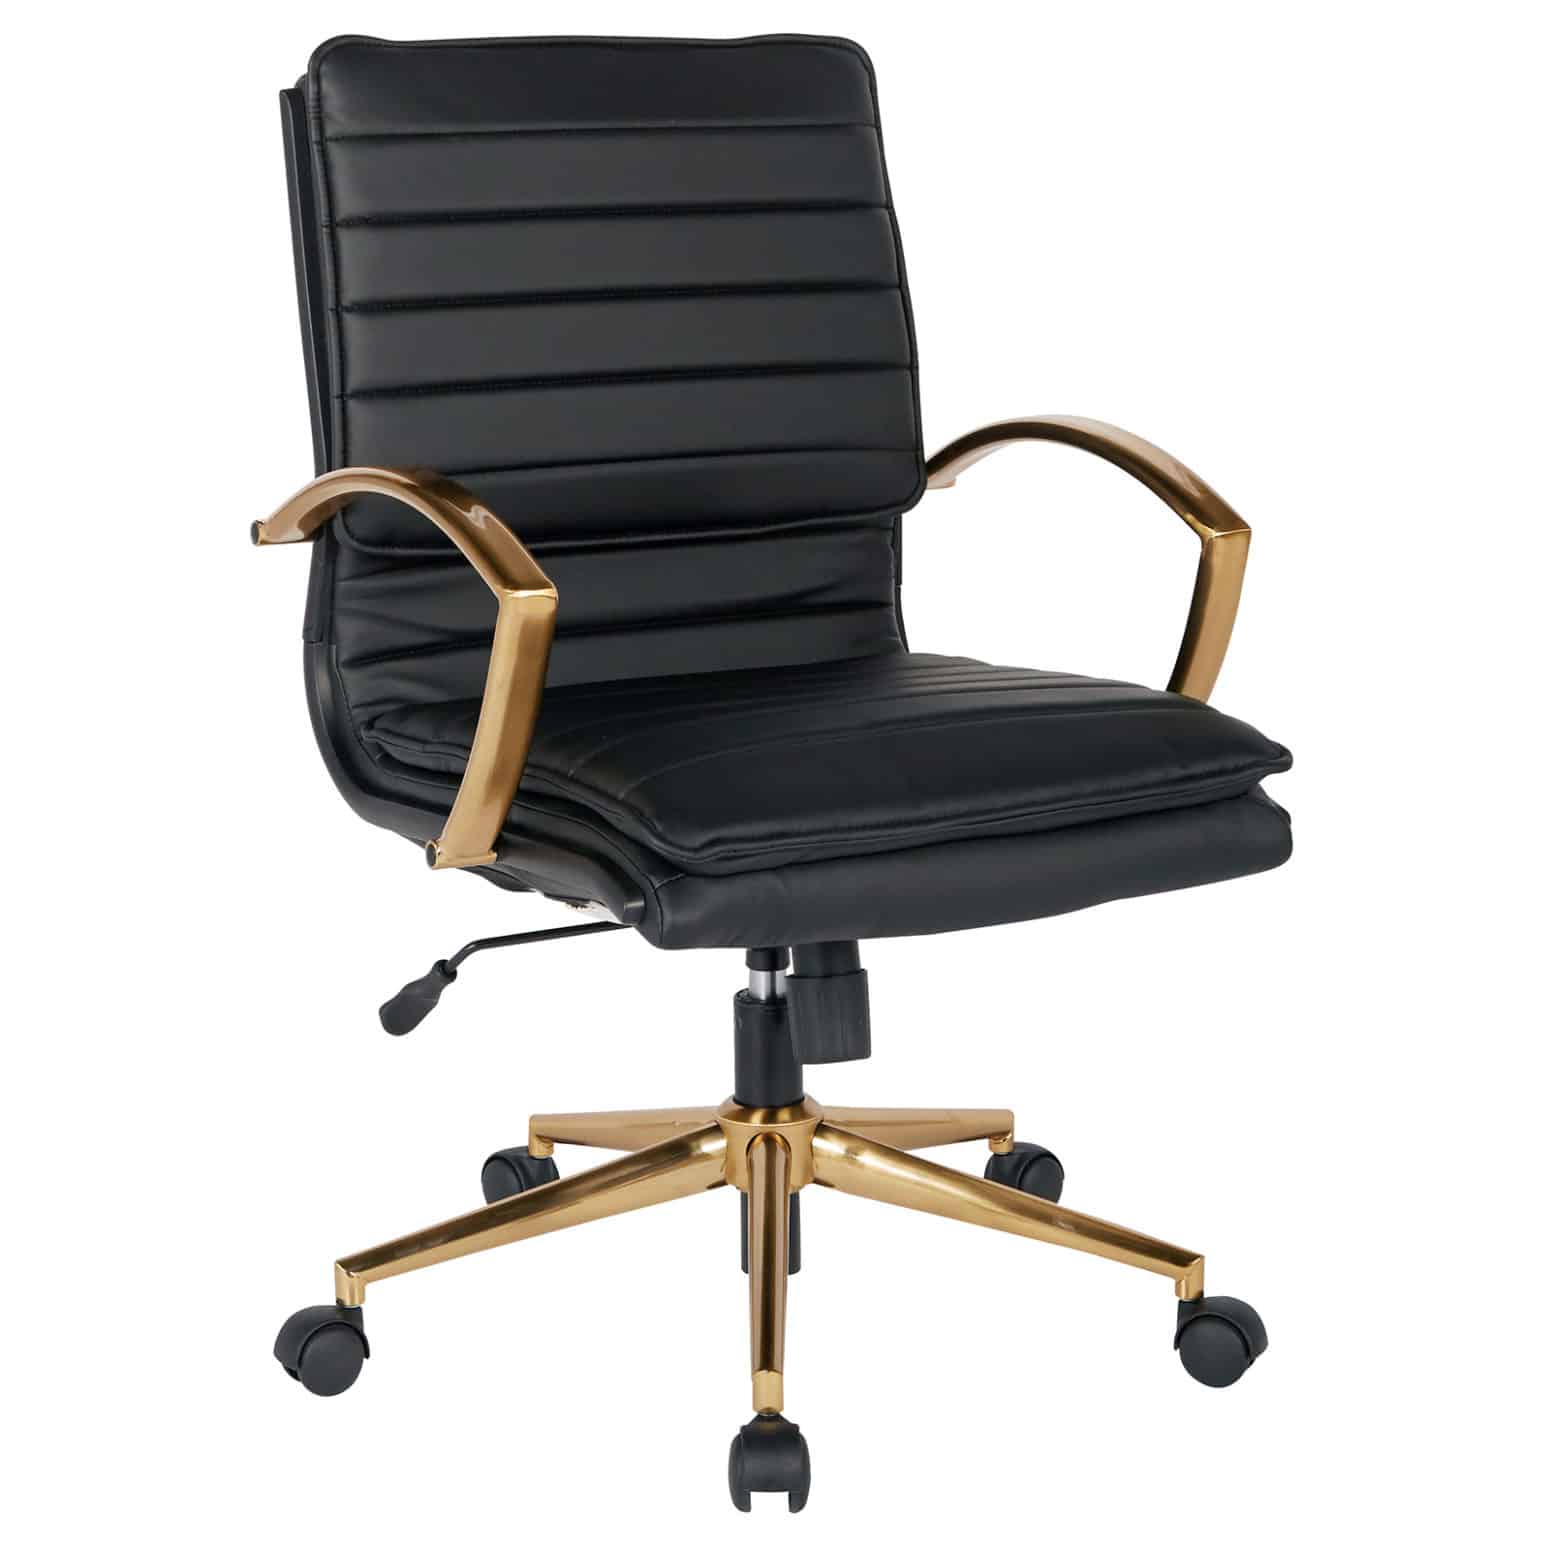 Worksmart Mid Back Black Faux Leather, Office Star Leather Chair